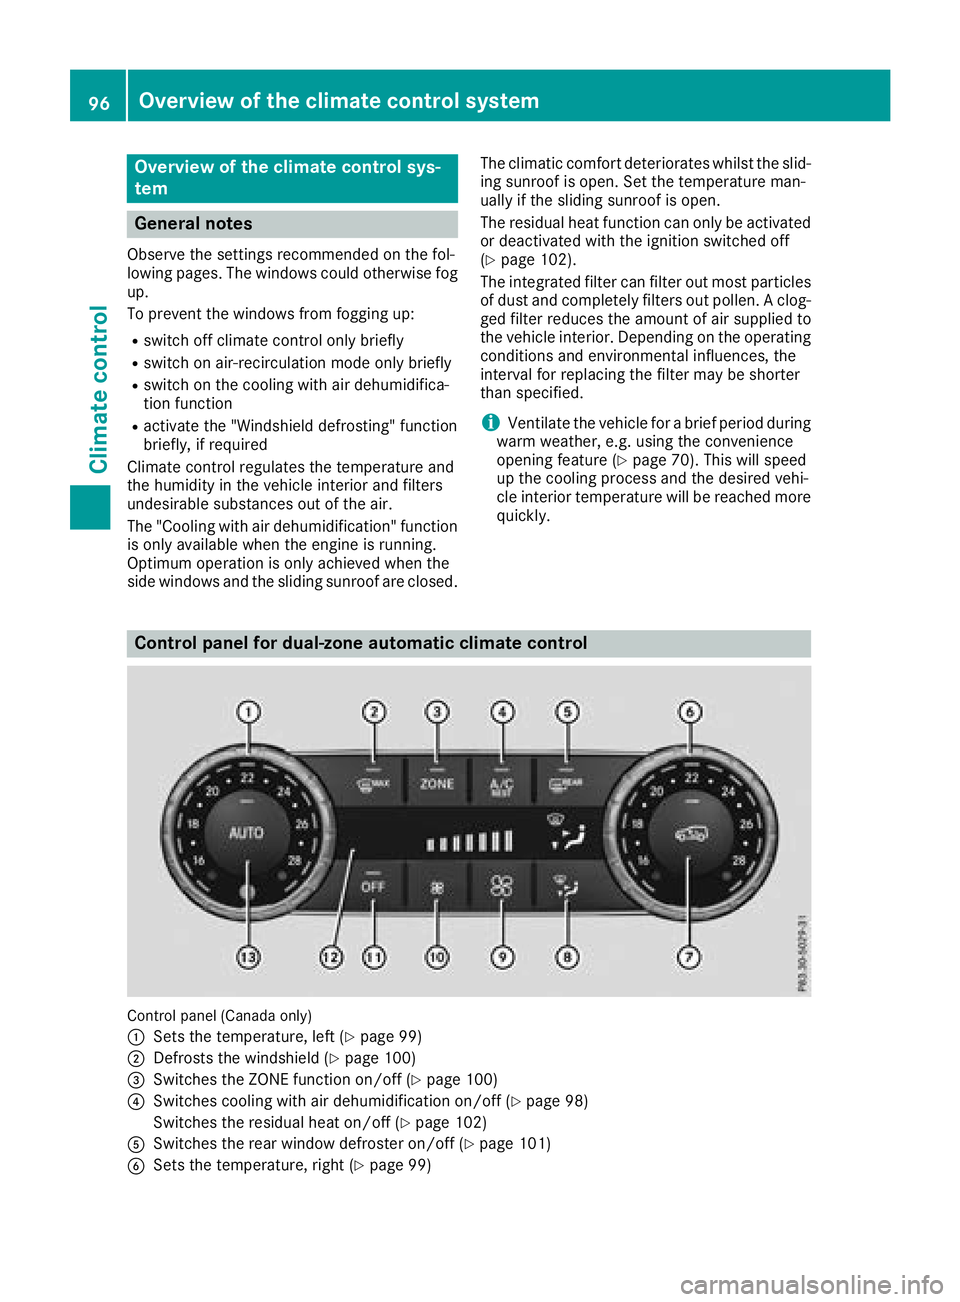 MERCEDES-BENZ G-CLASS 2018  Owners Manual Overview of the climate control sys-
tem
General notes
Observe the settings recommended on the fol-
lowing pages. The windows could otherwise fog
up.
To prevent the windows from fogging up:
Rswitch of